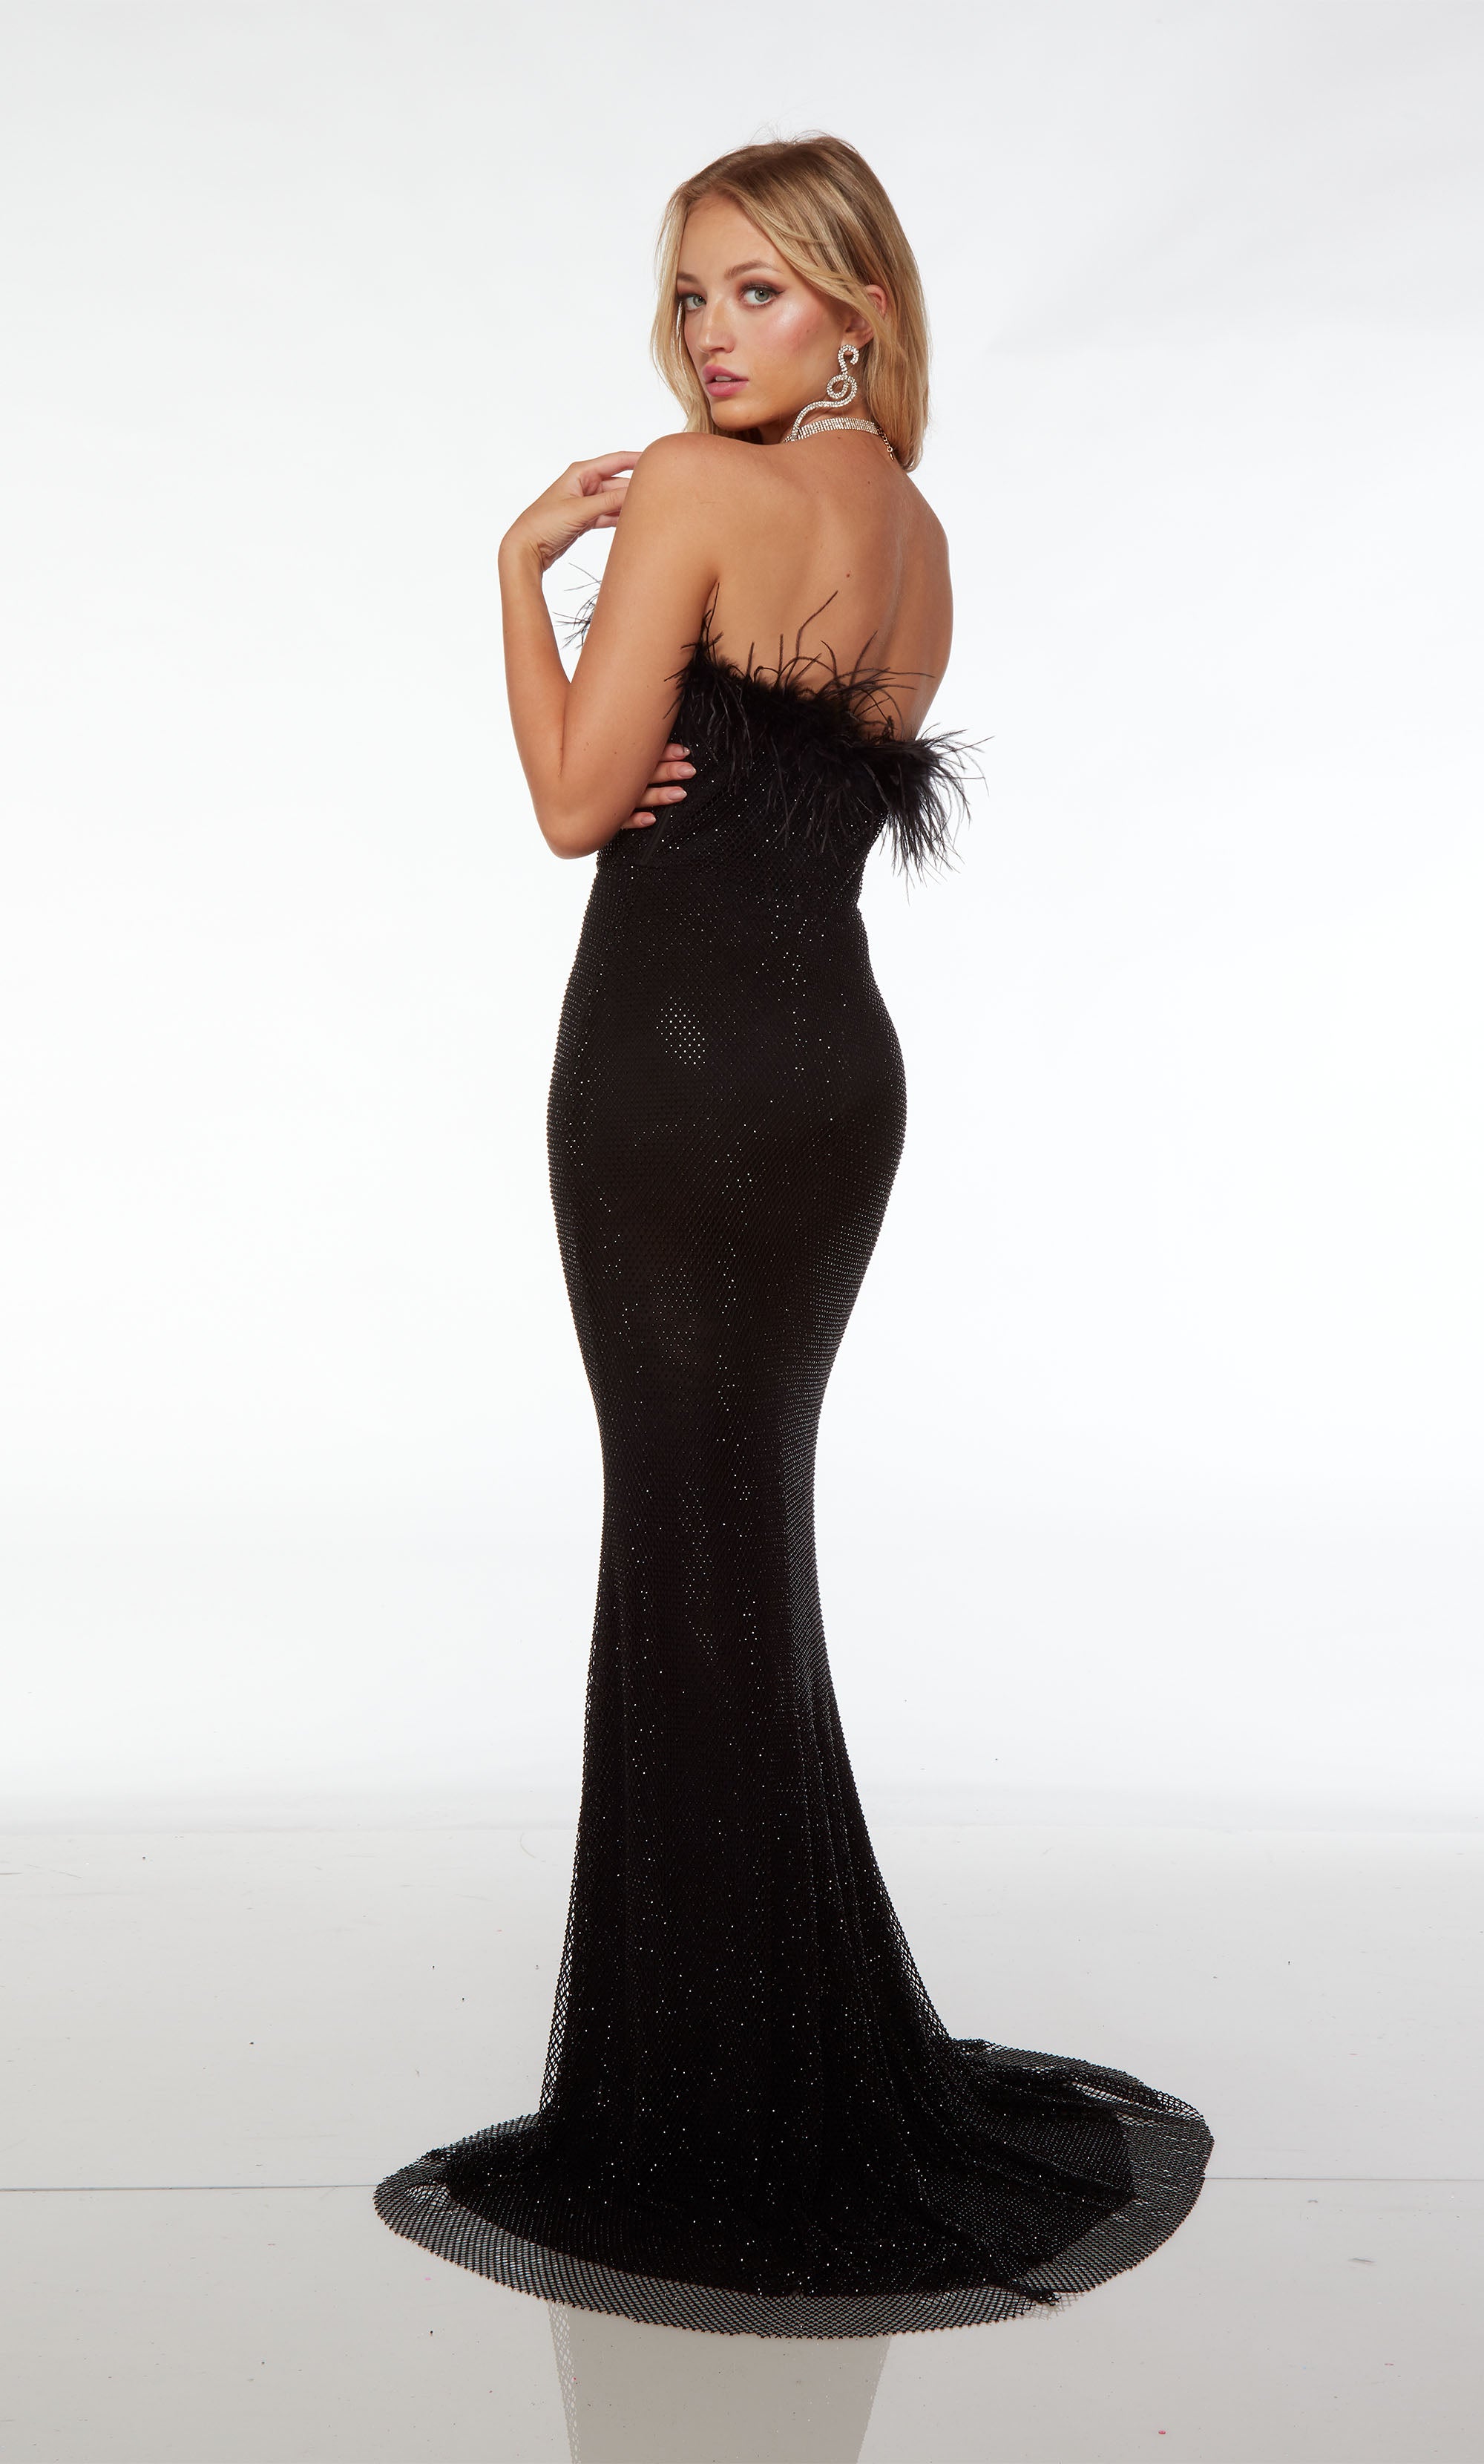 Fitted black hotfix gown featuring an strapless feather-trimmed neckline, corset bodice, zipper enclosure, and an graceful train.